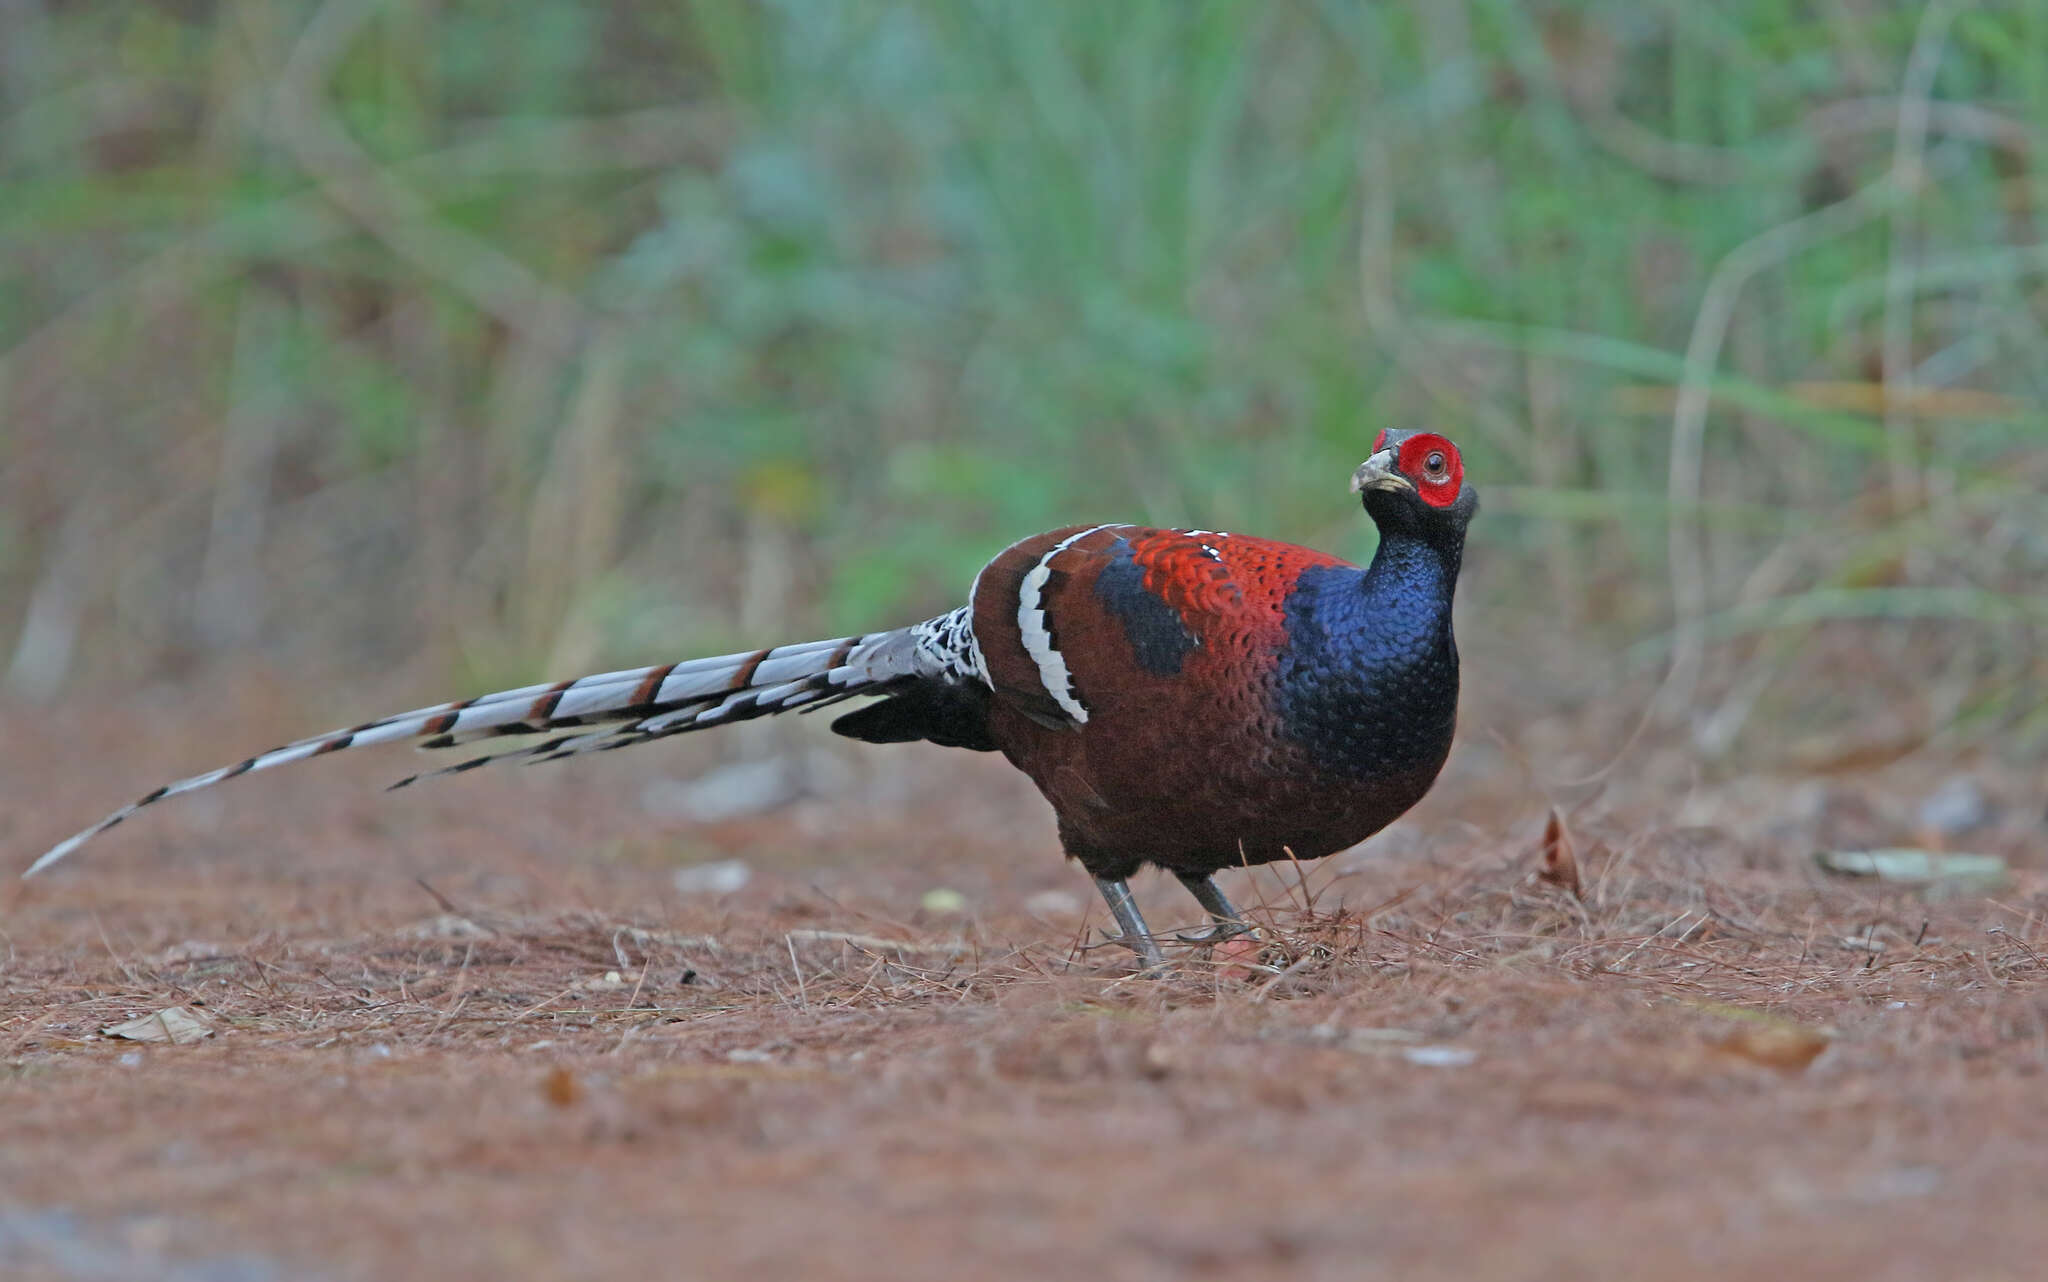 Image of Hume's Bar-tailed Pheasant